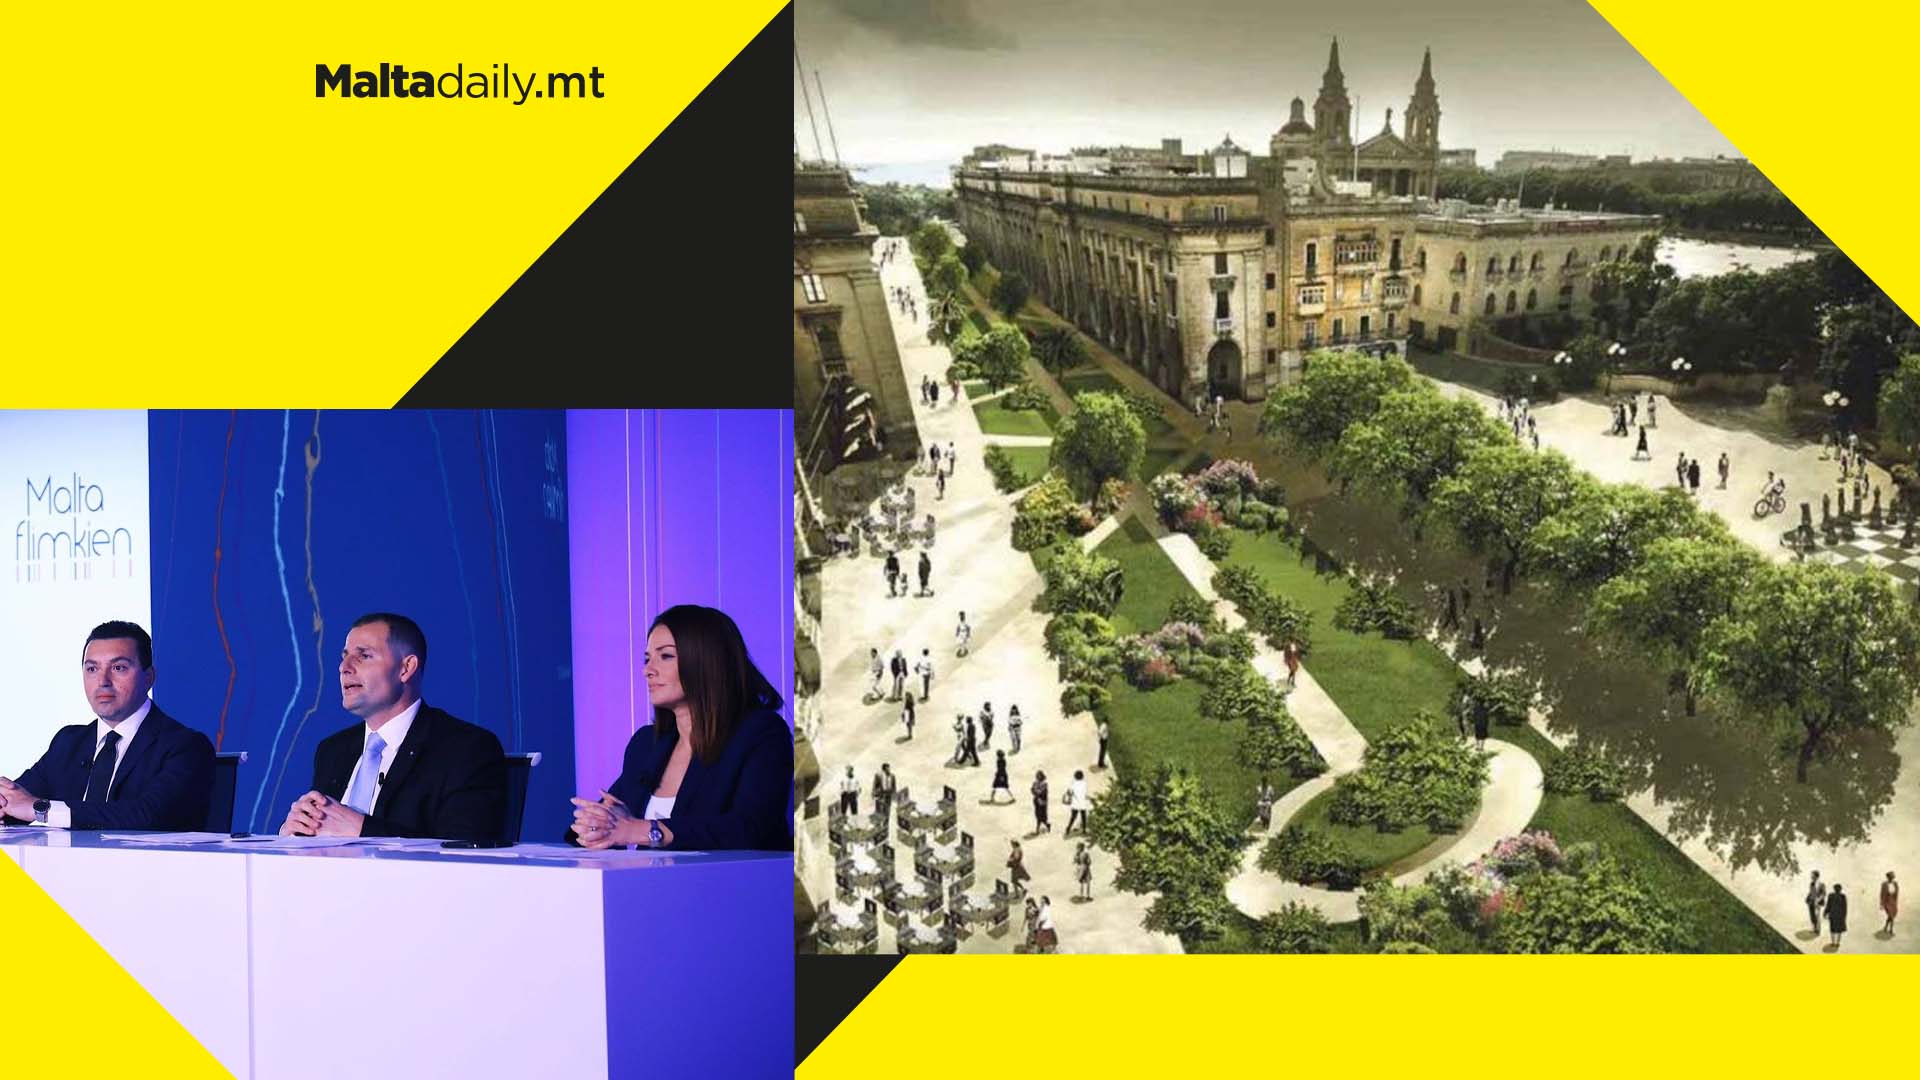 WATCH: Here’s how Malta could look like according to Labour’s green proposals